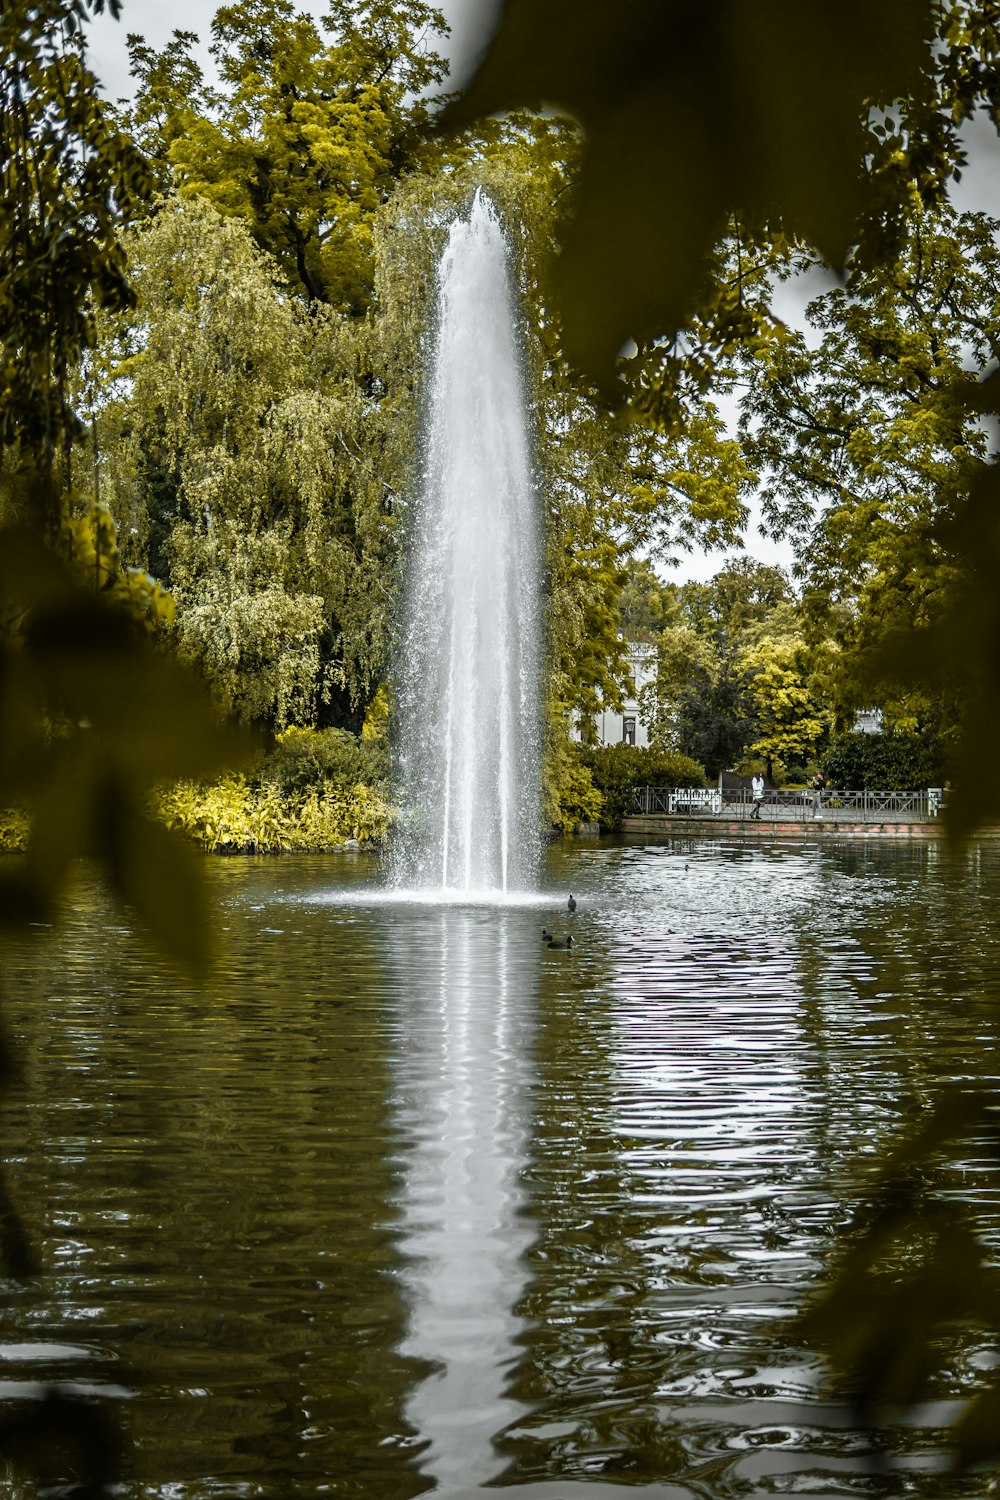 fountain in the middle of body of water near trees